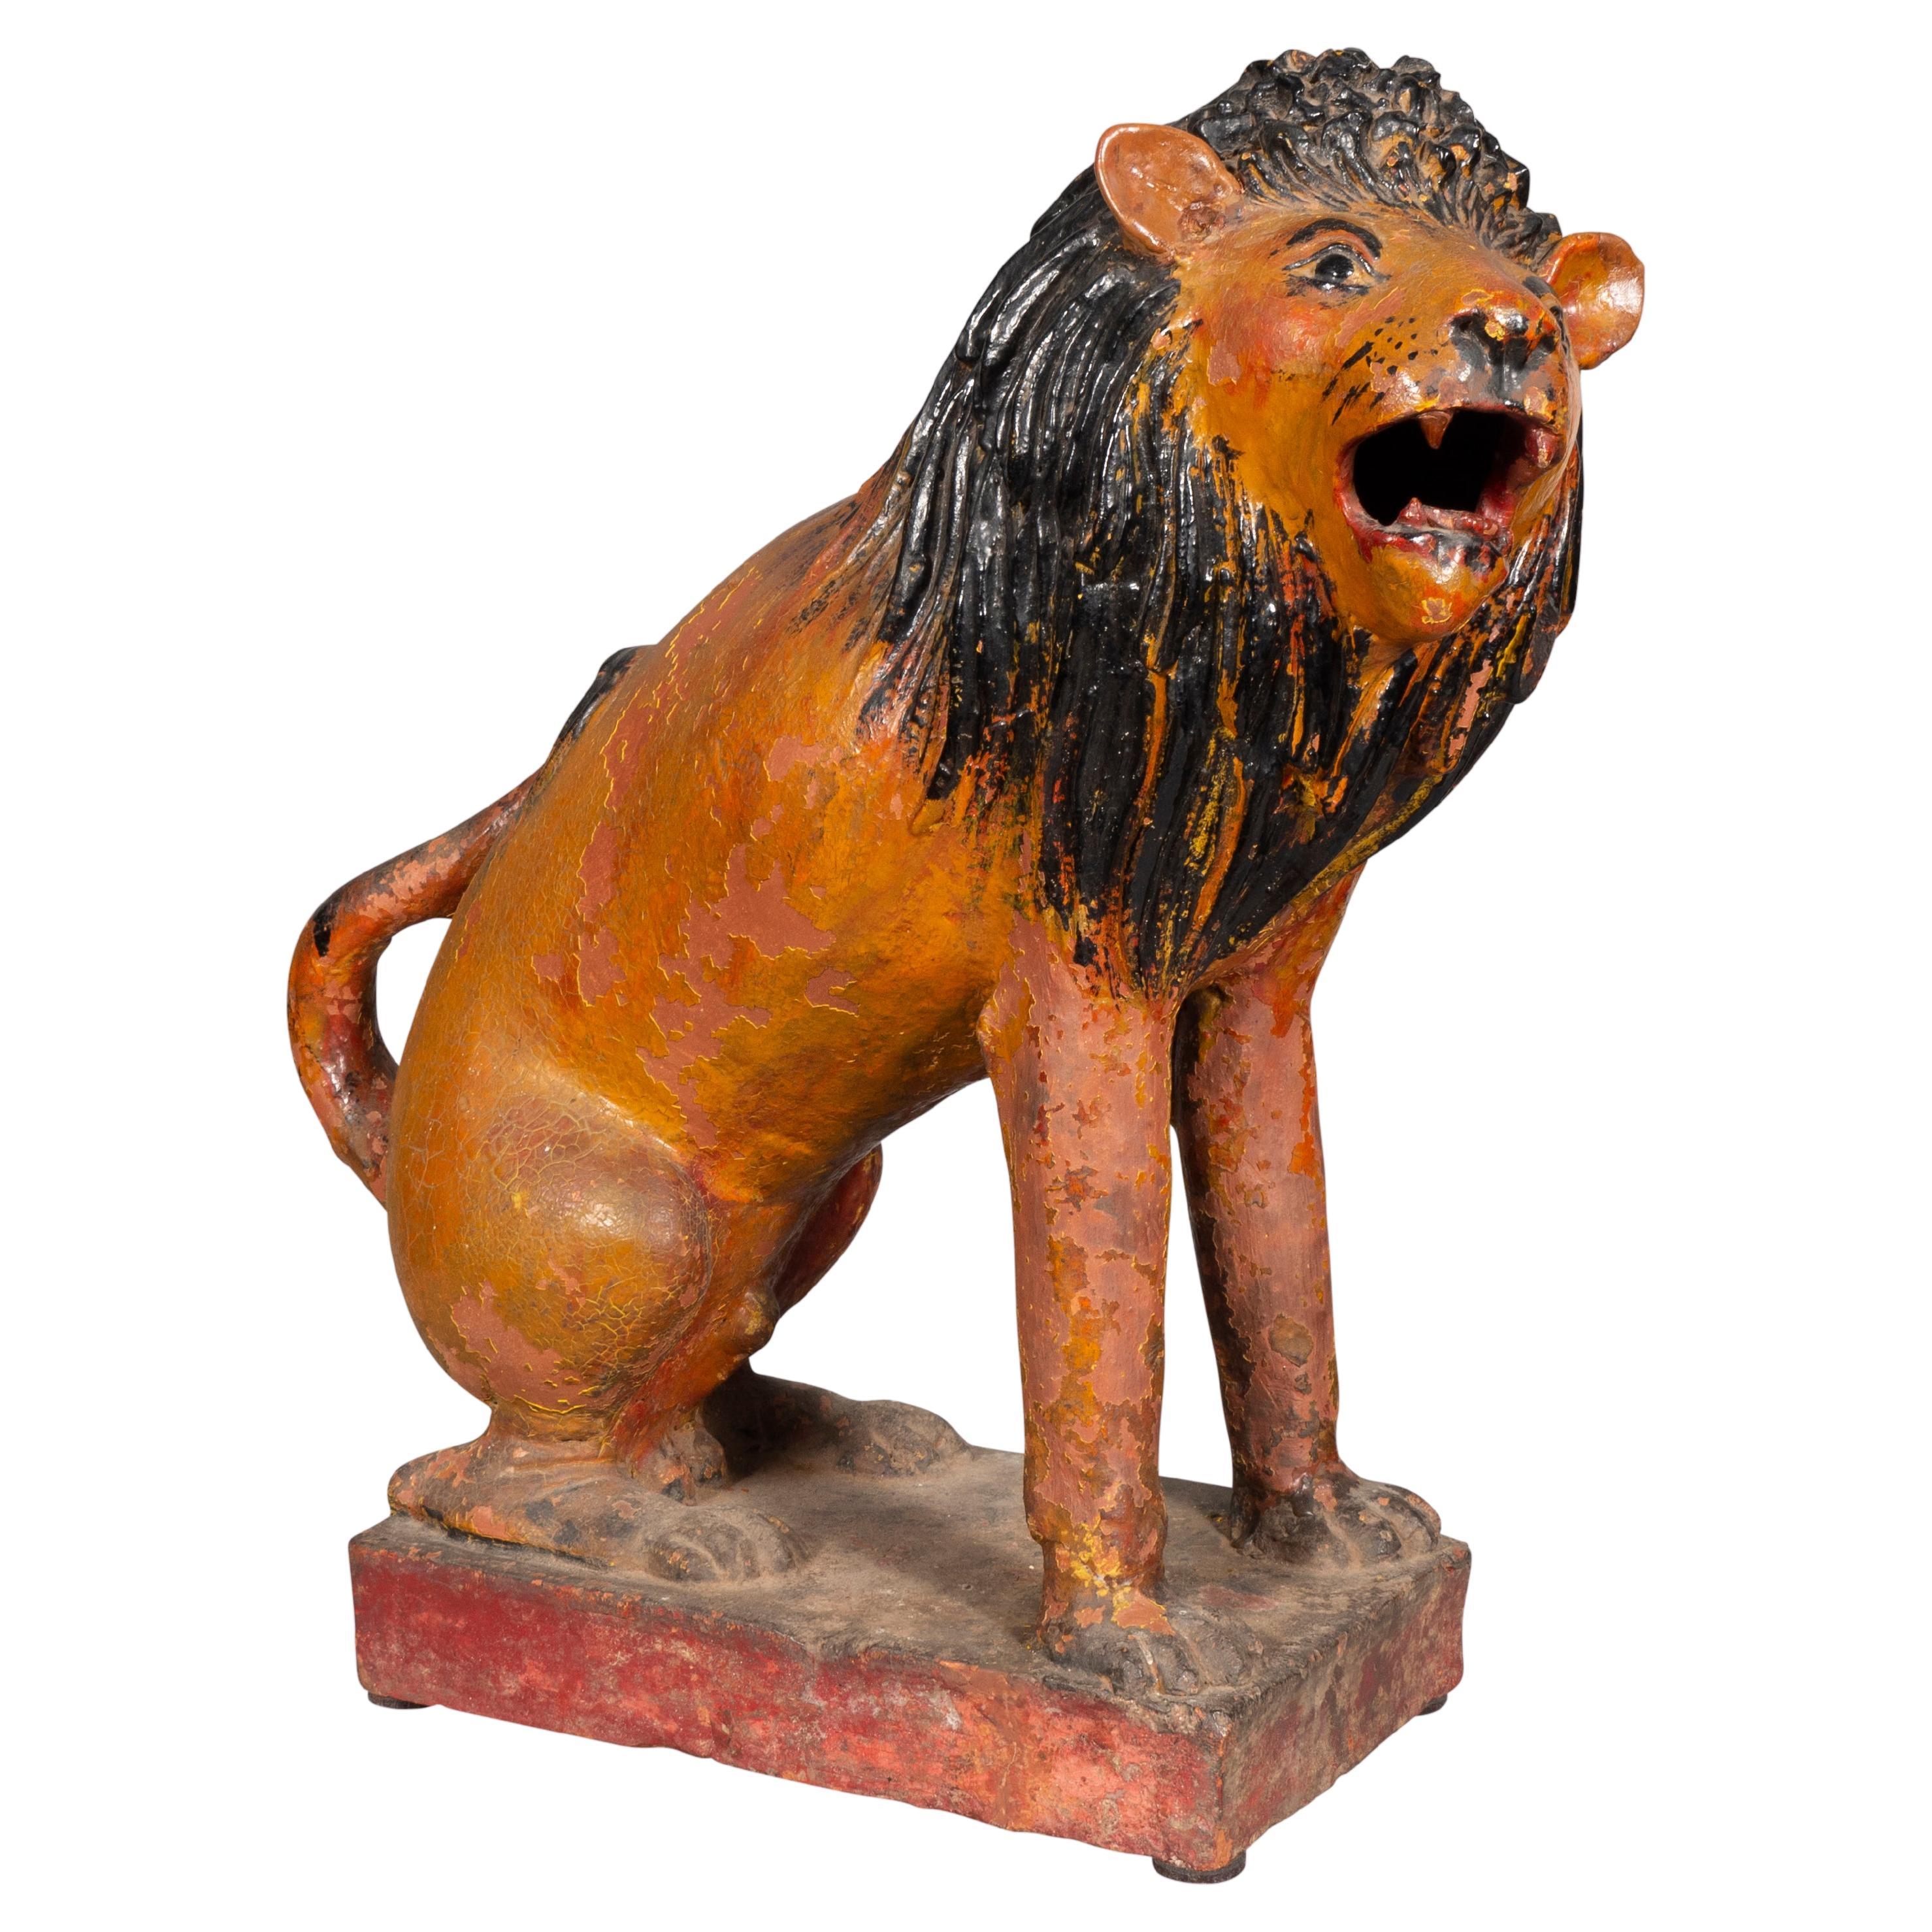 The proud lion seated letting out a roar. On a plinth base.
Used in the movie 